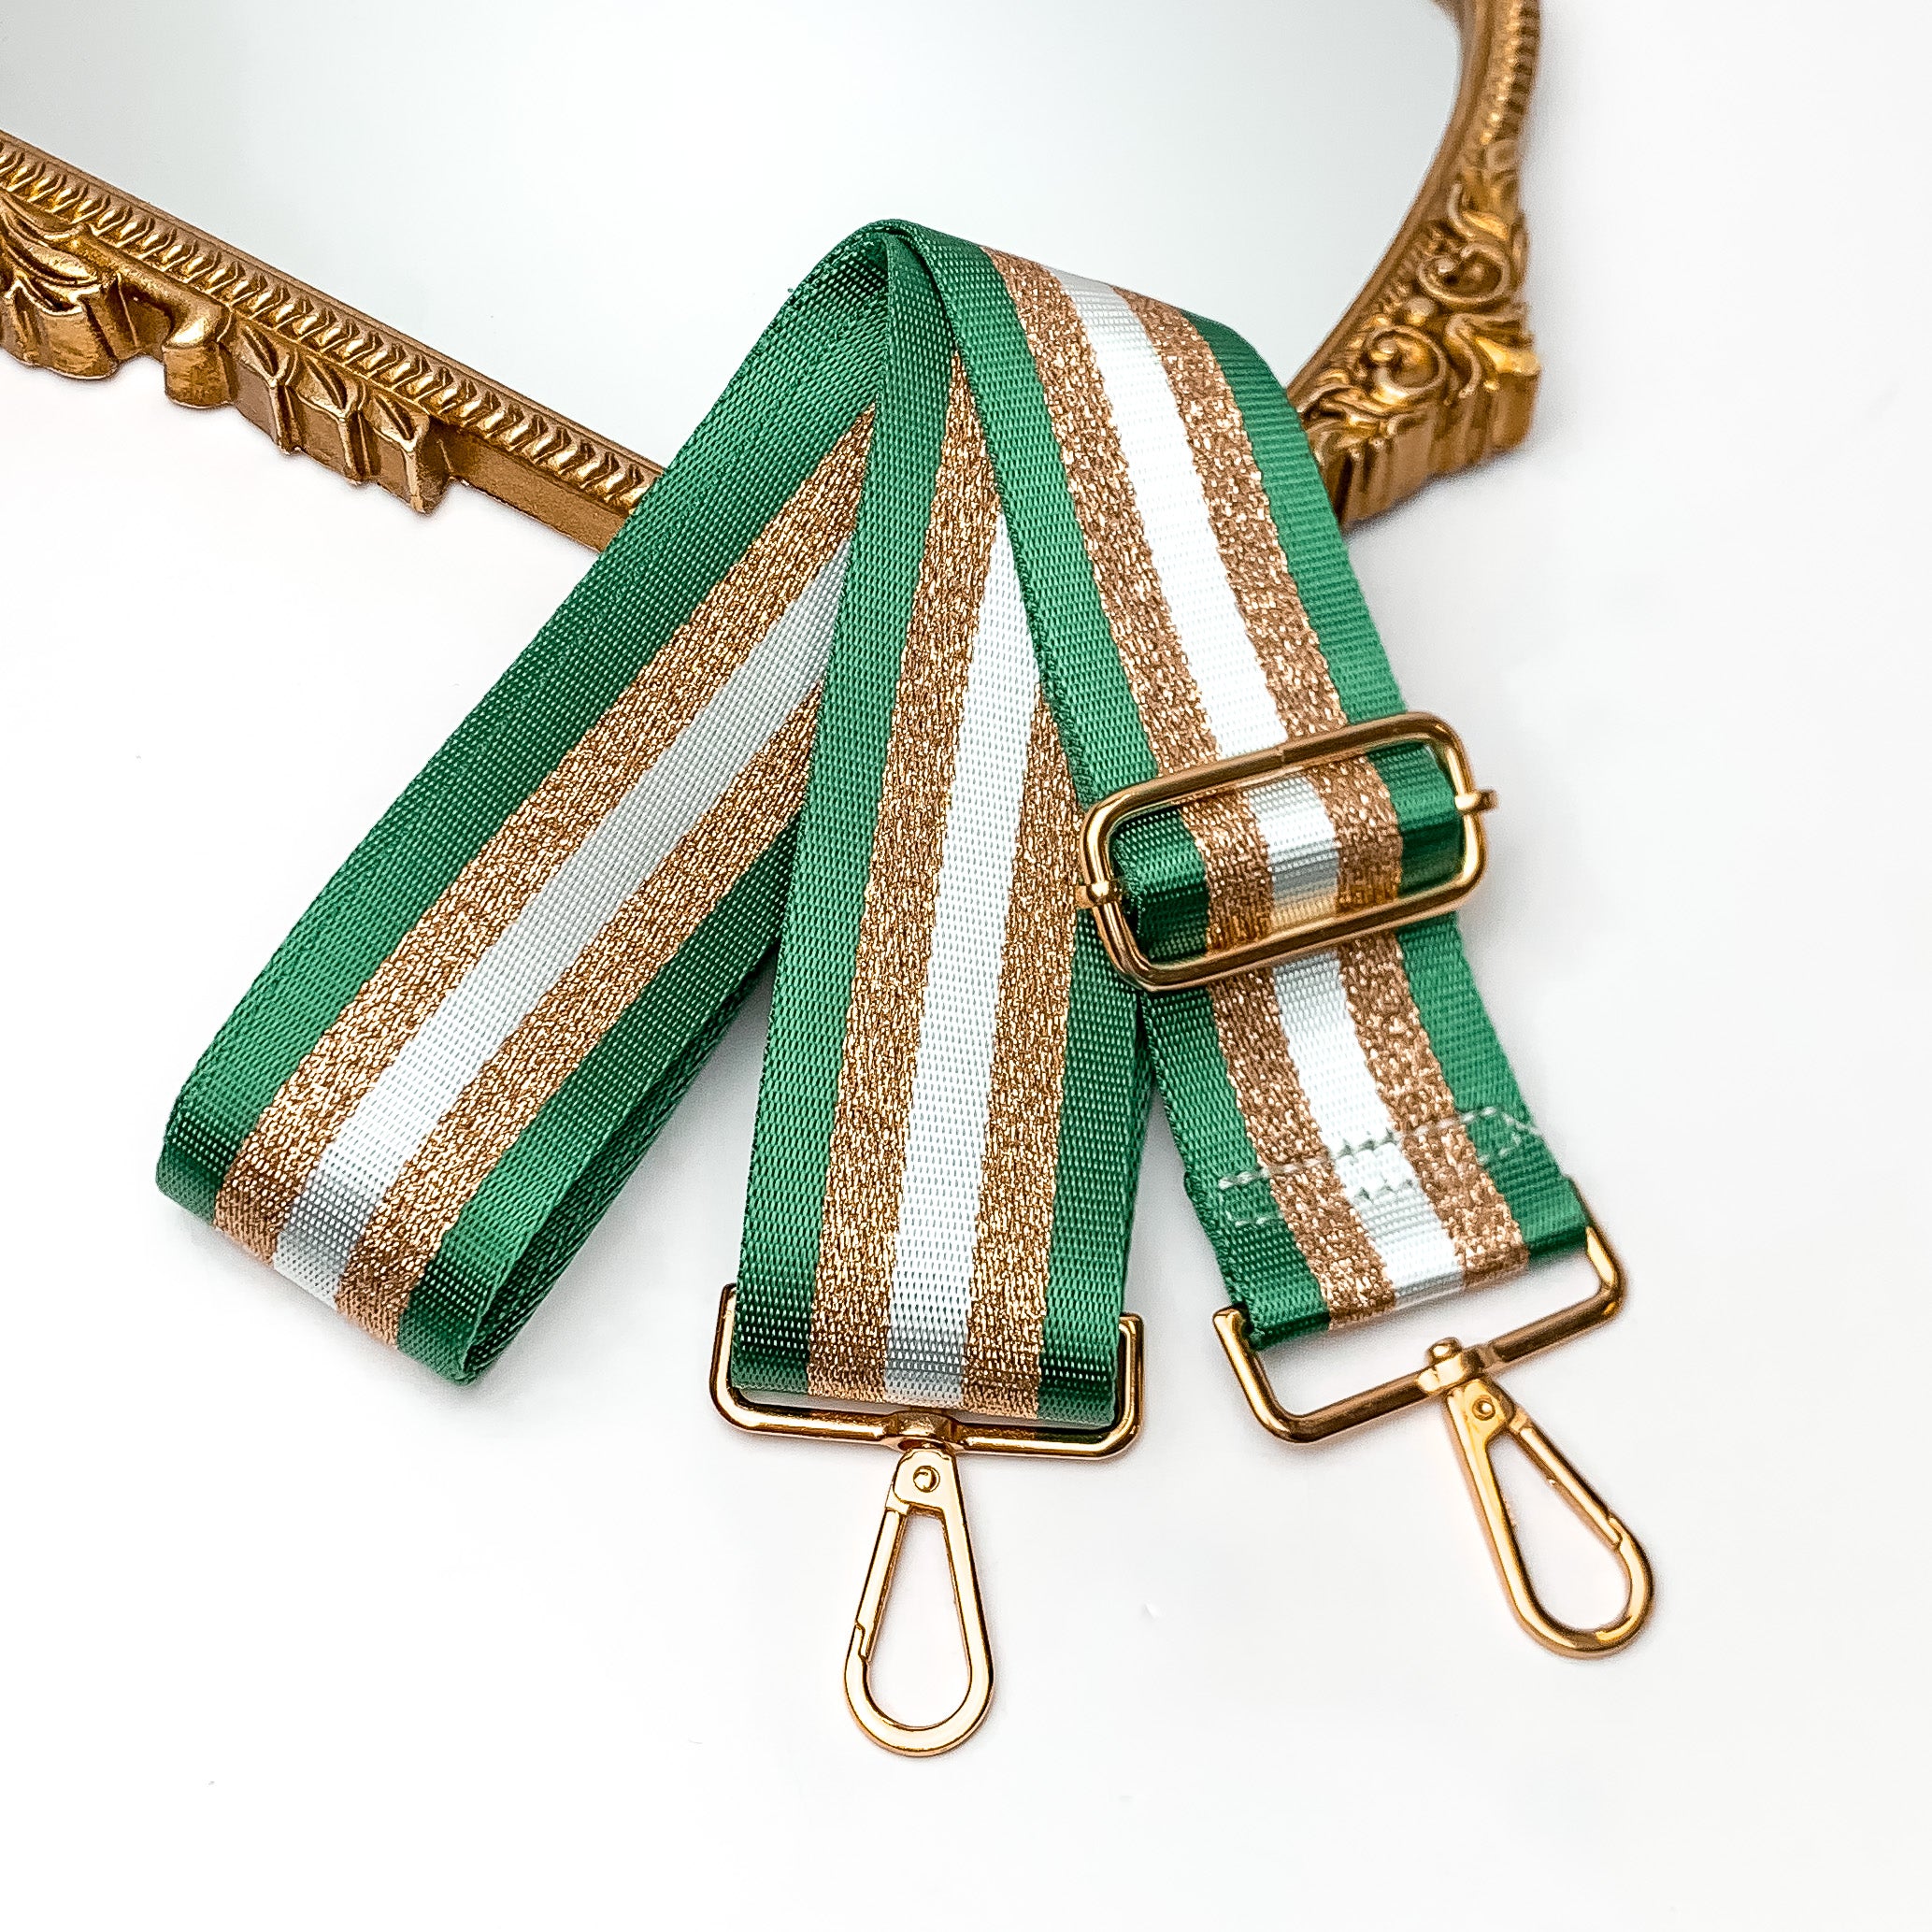 Striped Adjustable Purse Strap in Green. This purse strap is pictured on a white background with a gold trimmed mirror in the corner.